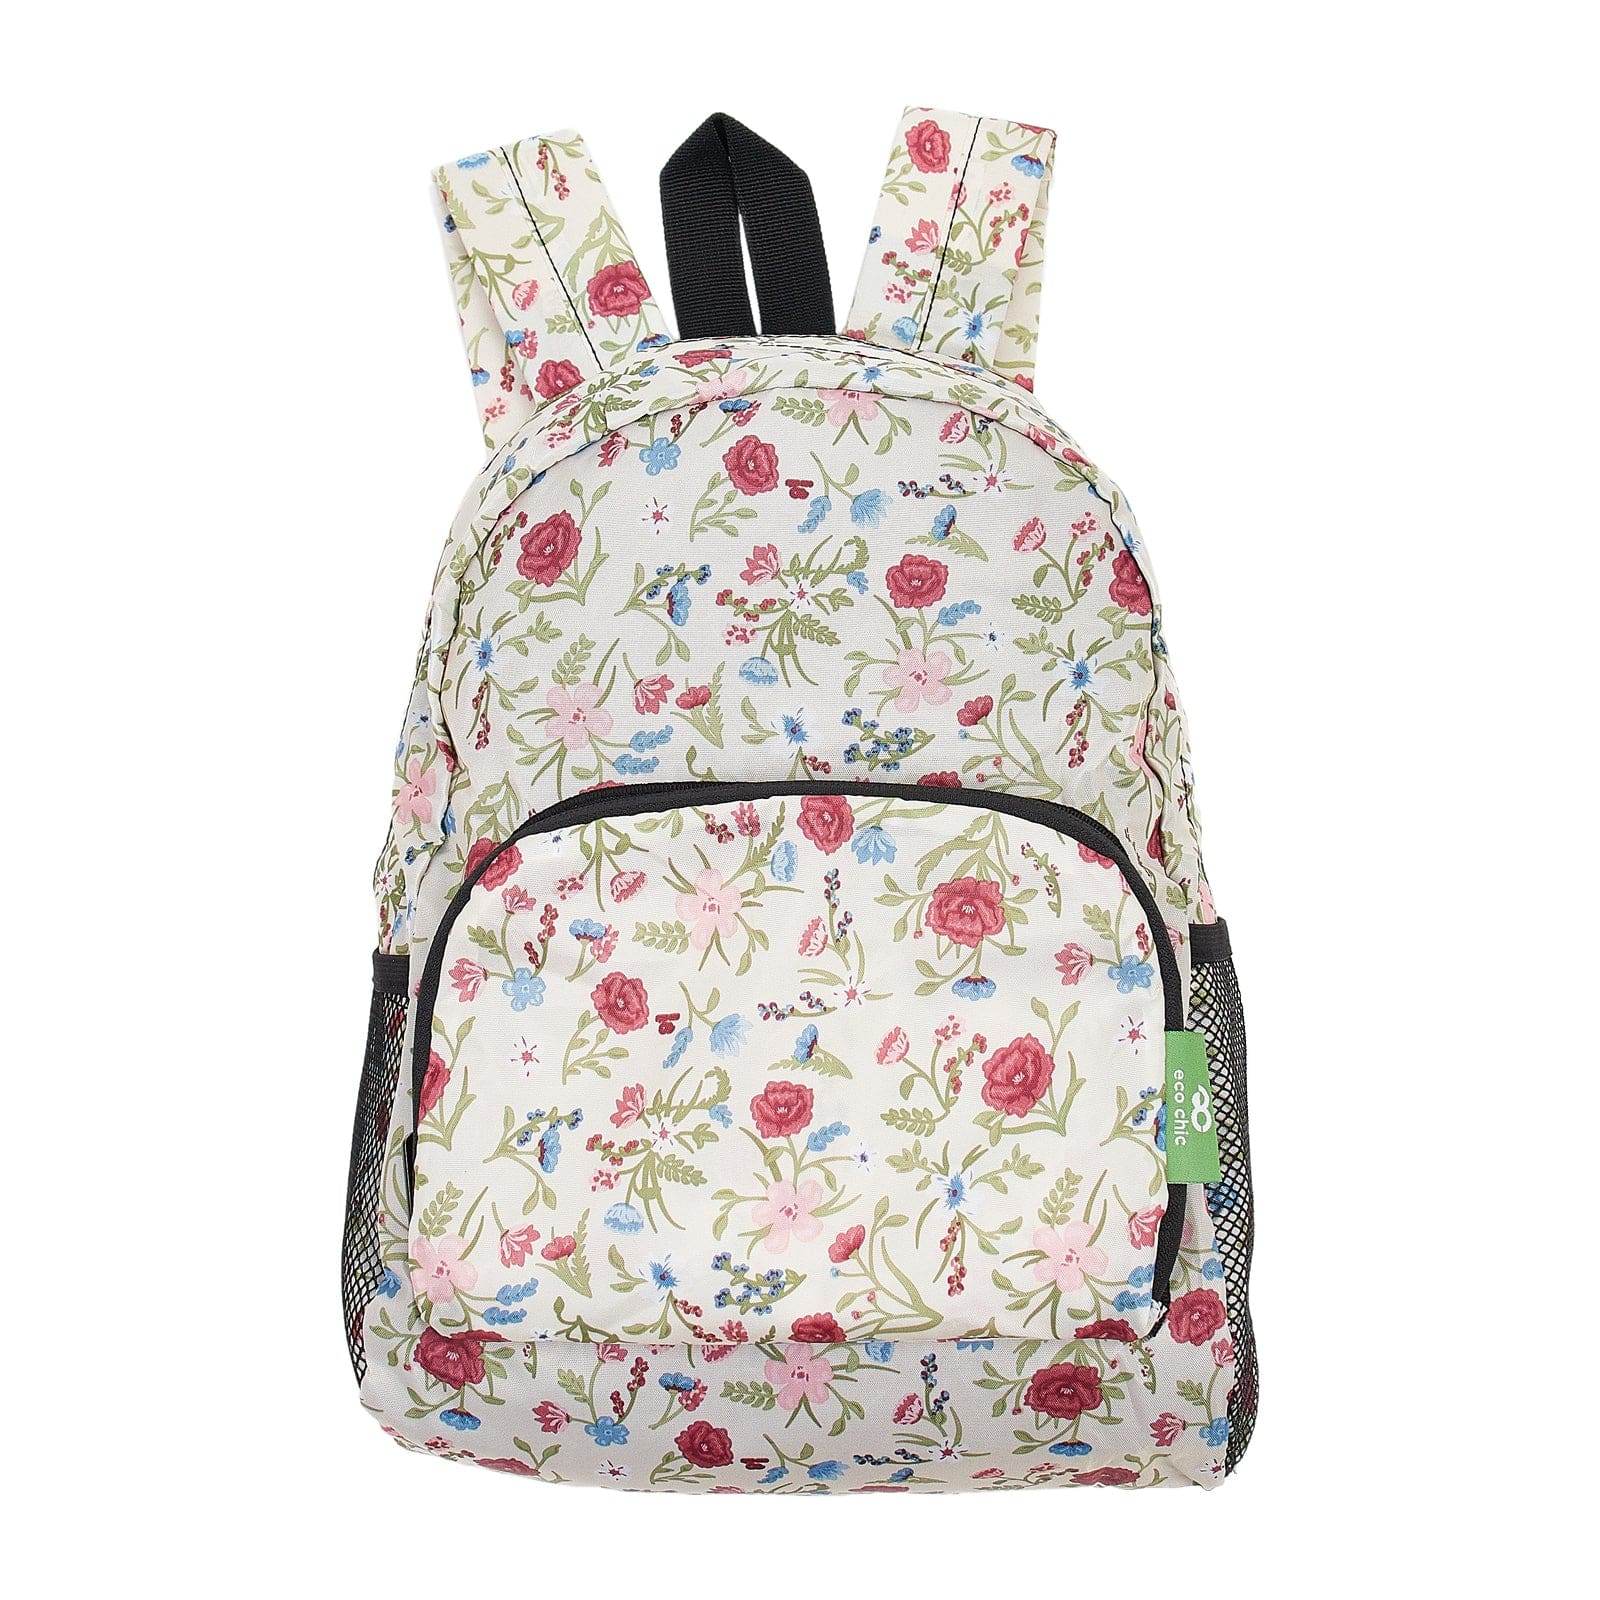 Eco Chic Beige Eco Chic Lightweight Foldable Mini Backpack Floral